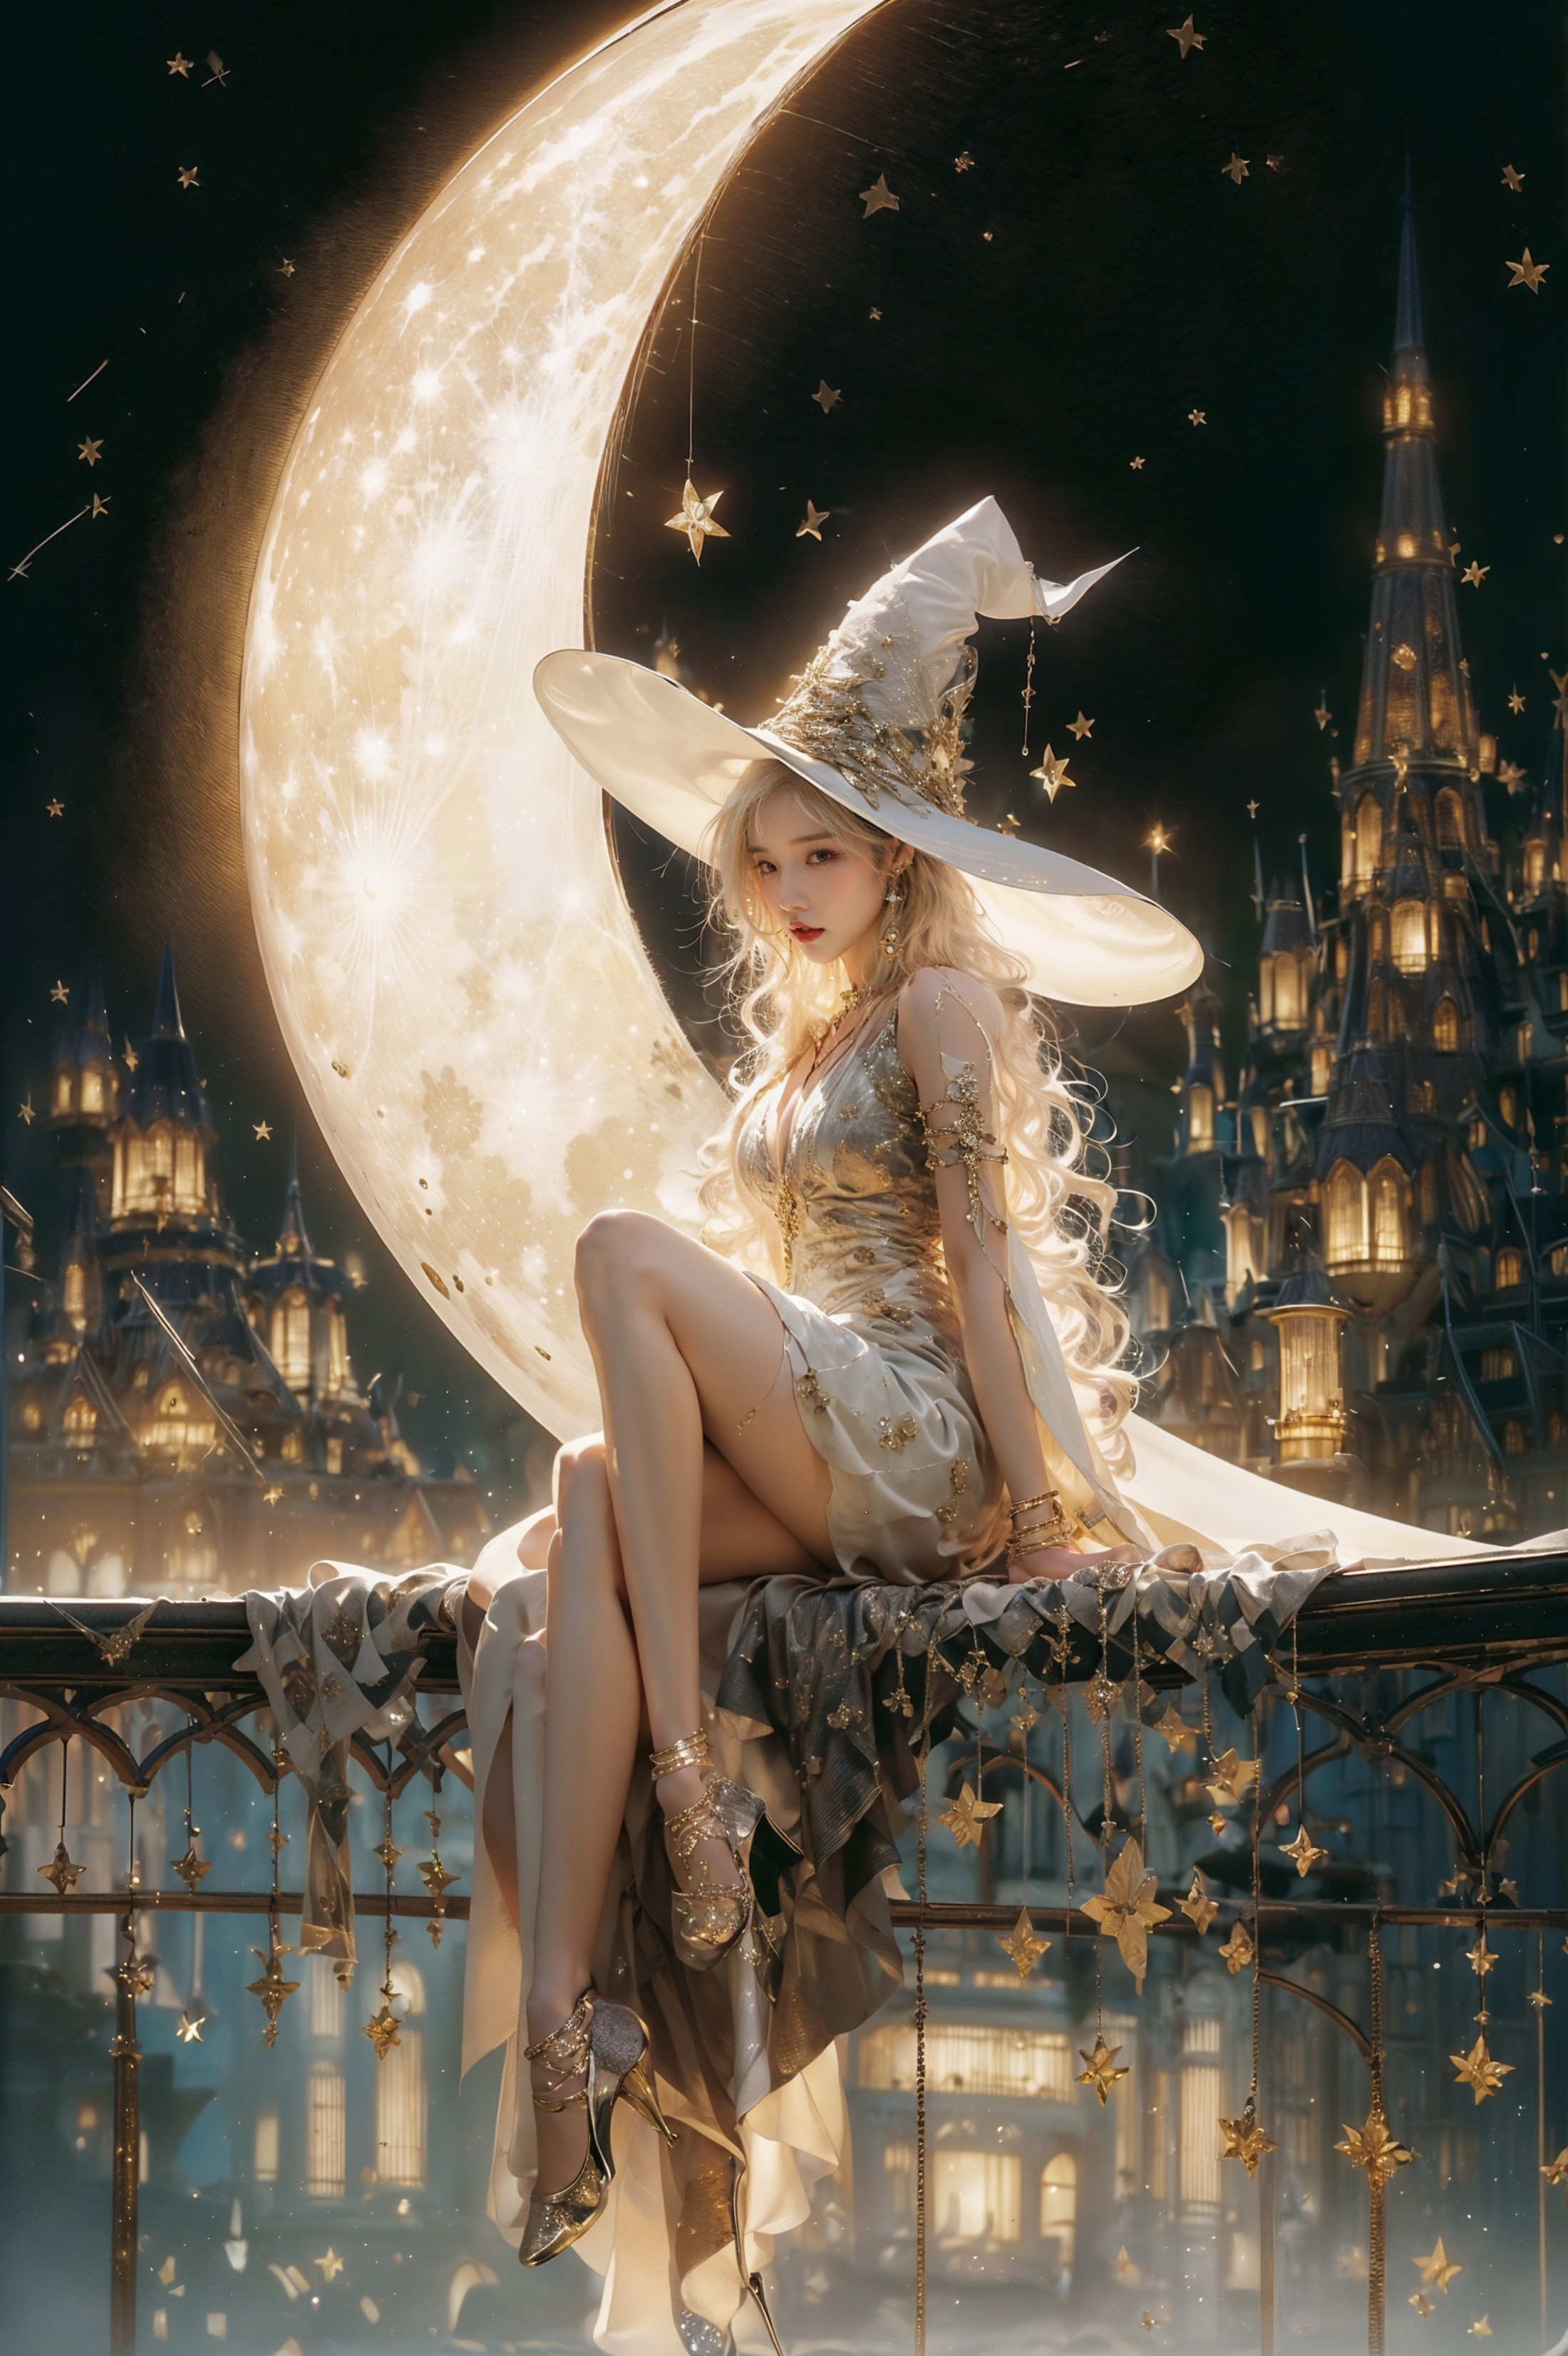 Moon Witch1girlwitch hatblonde hairWitch gownjewelryhigh heelscleavageearringsbraceletbare shoulderswhite thigh...